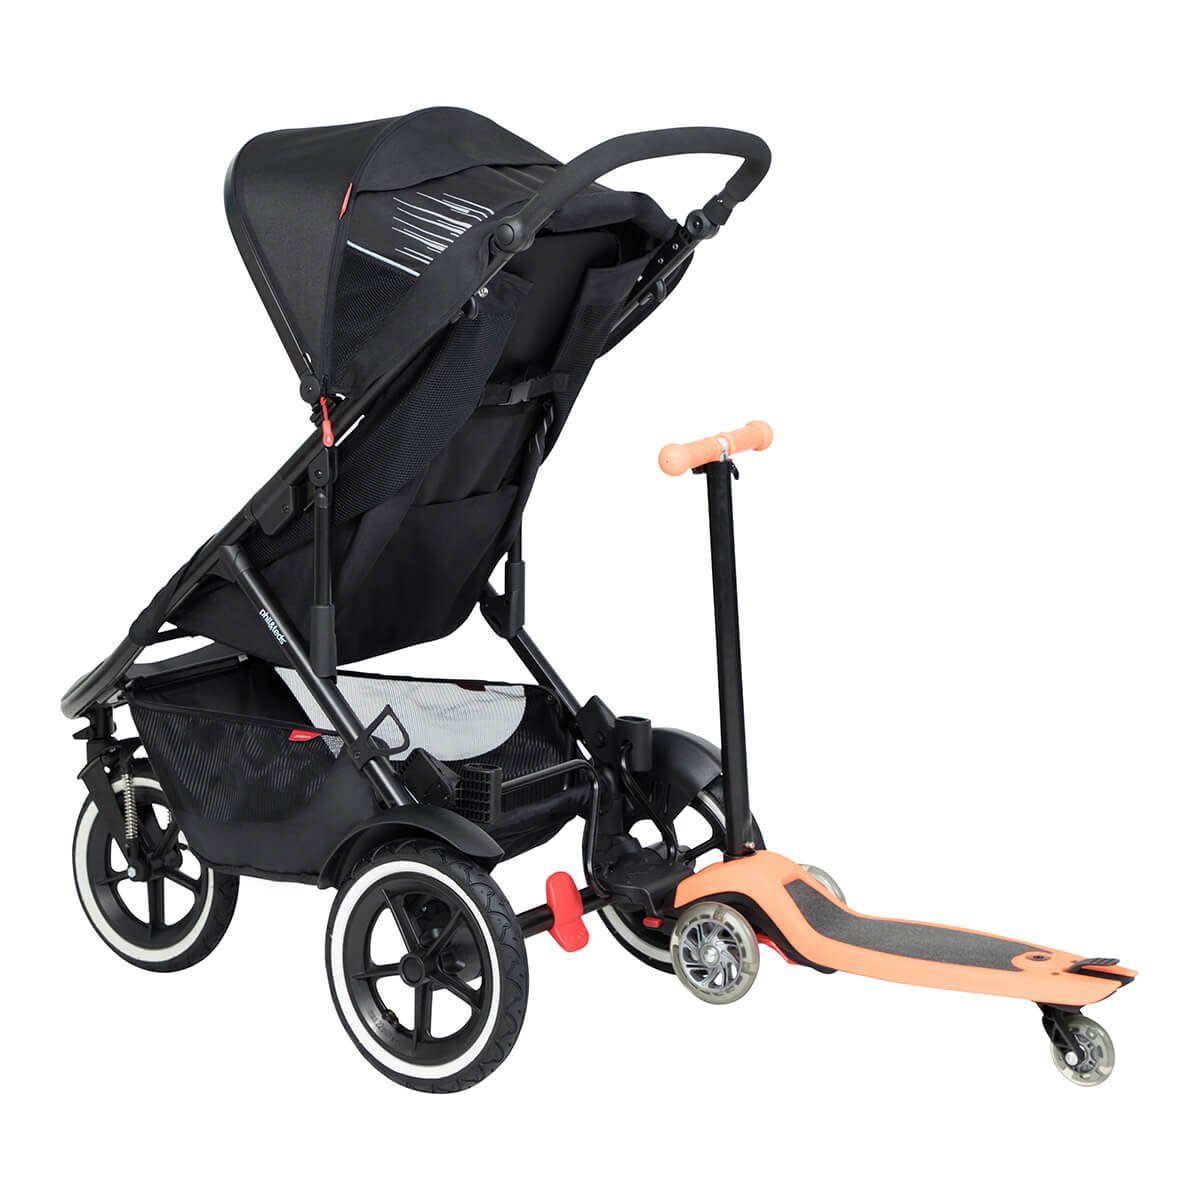 https://cdn.accentuate.io/7921432133810/19437753860274/philteds-sport-buggy-with-freerider-stroller-board-in-rear-v1706737897013.jpg?1200x1200